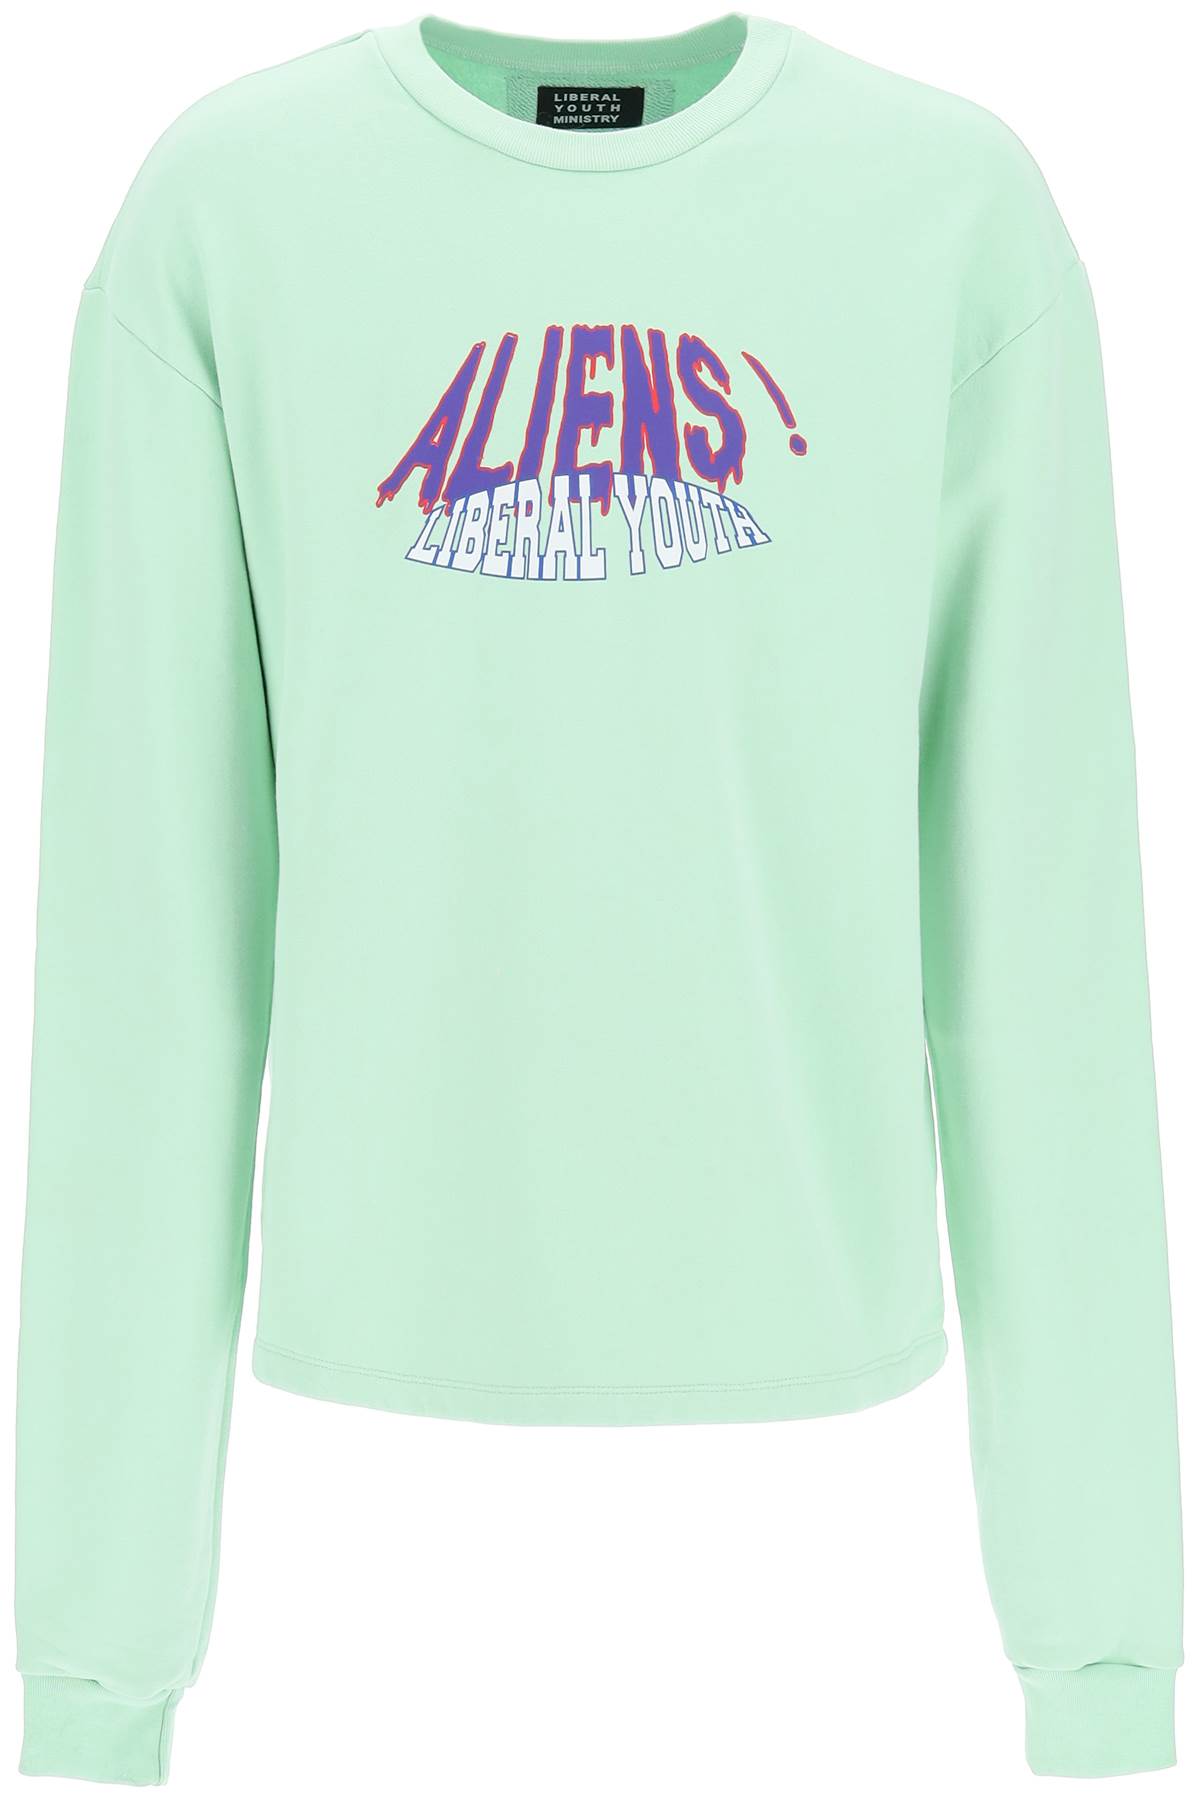 LIBERAL YOUTH MINISTRY ALIENS SWEATSHIRT